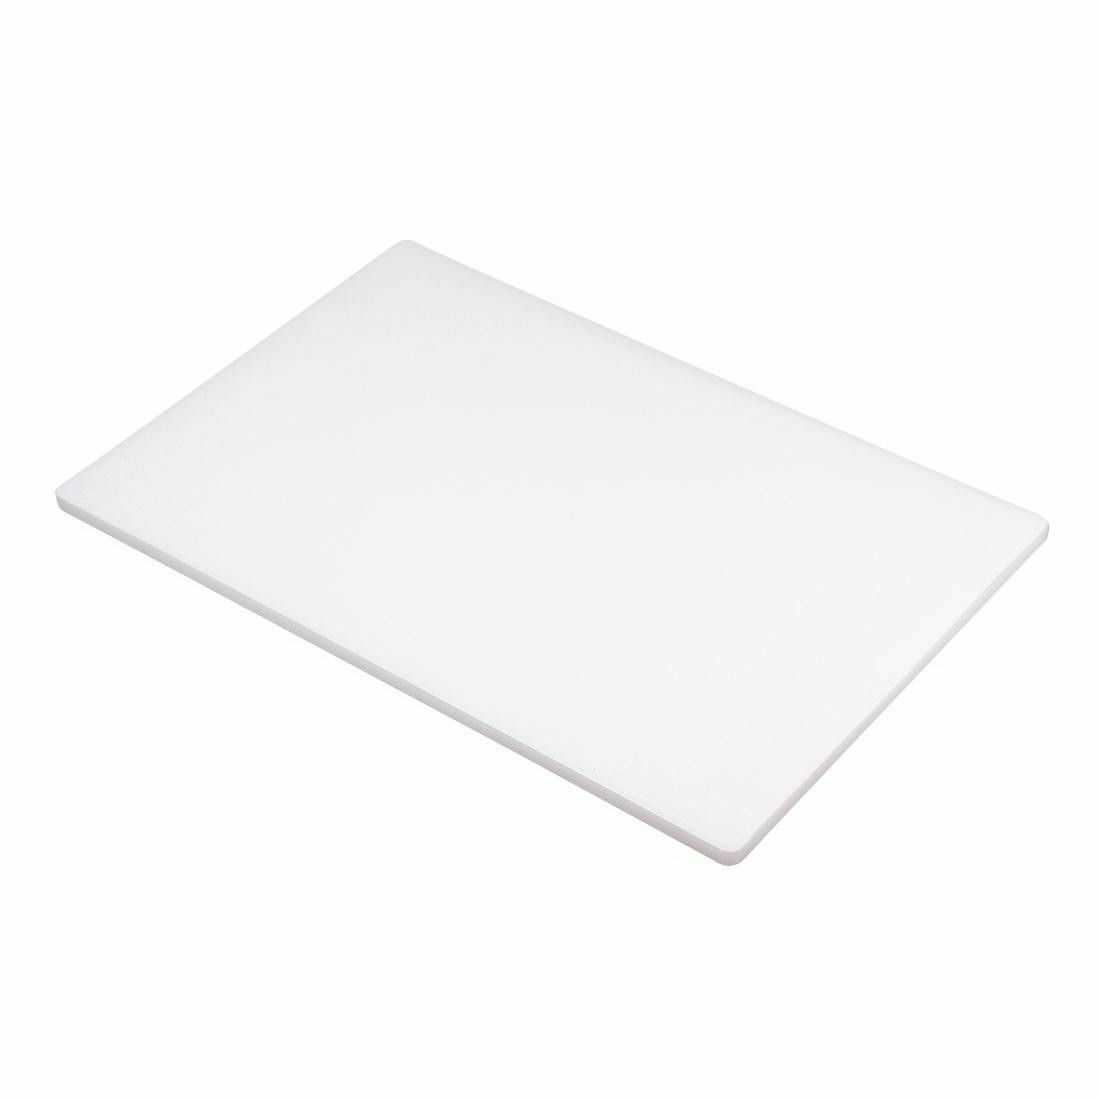 White Kitchen Chopping Board Commercial Cutting Board Colour Coded Hygiene Catering Food Cutting Set